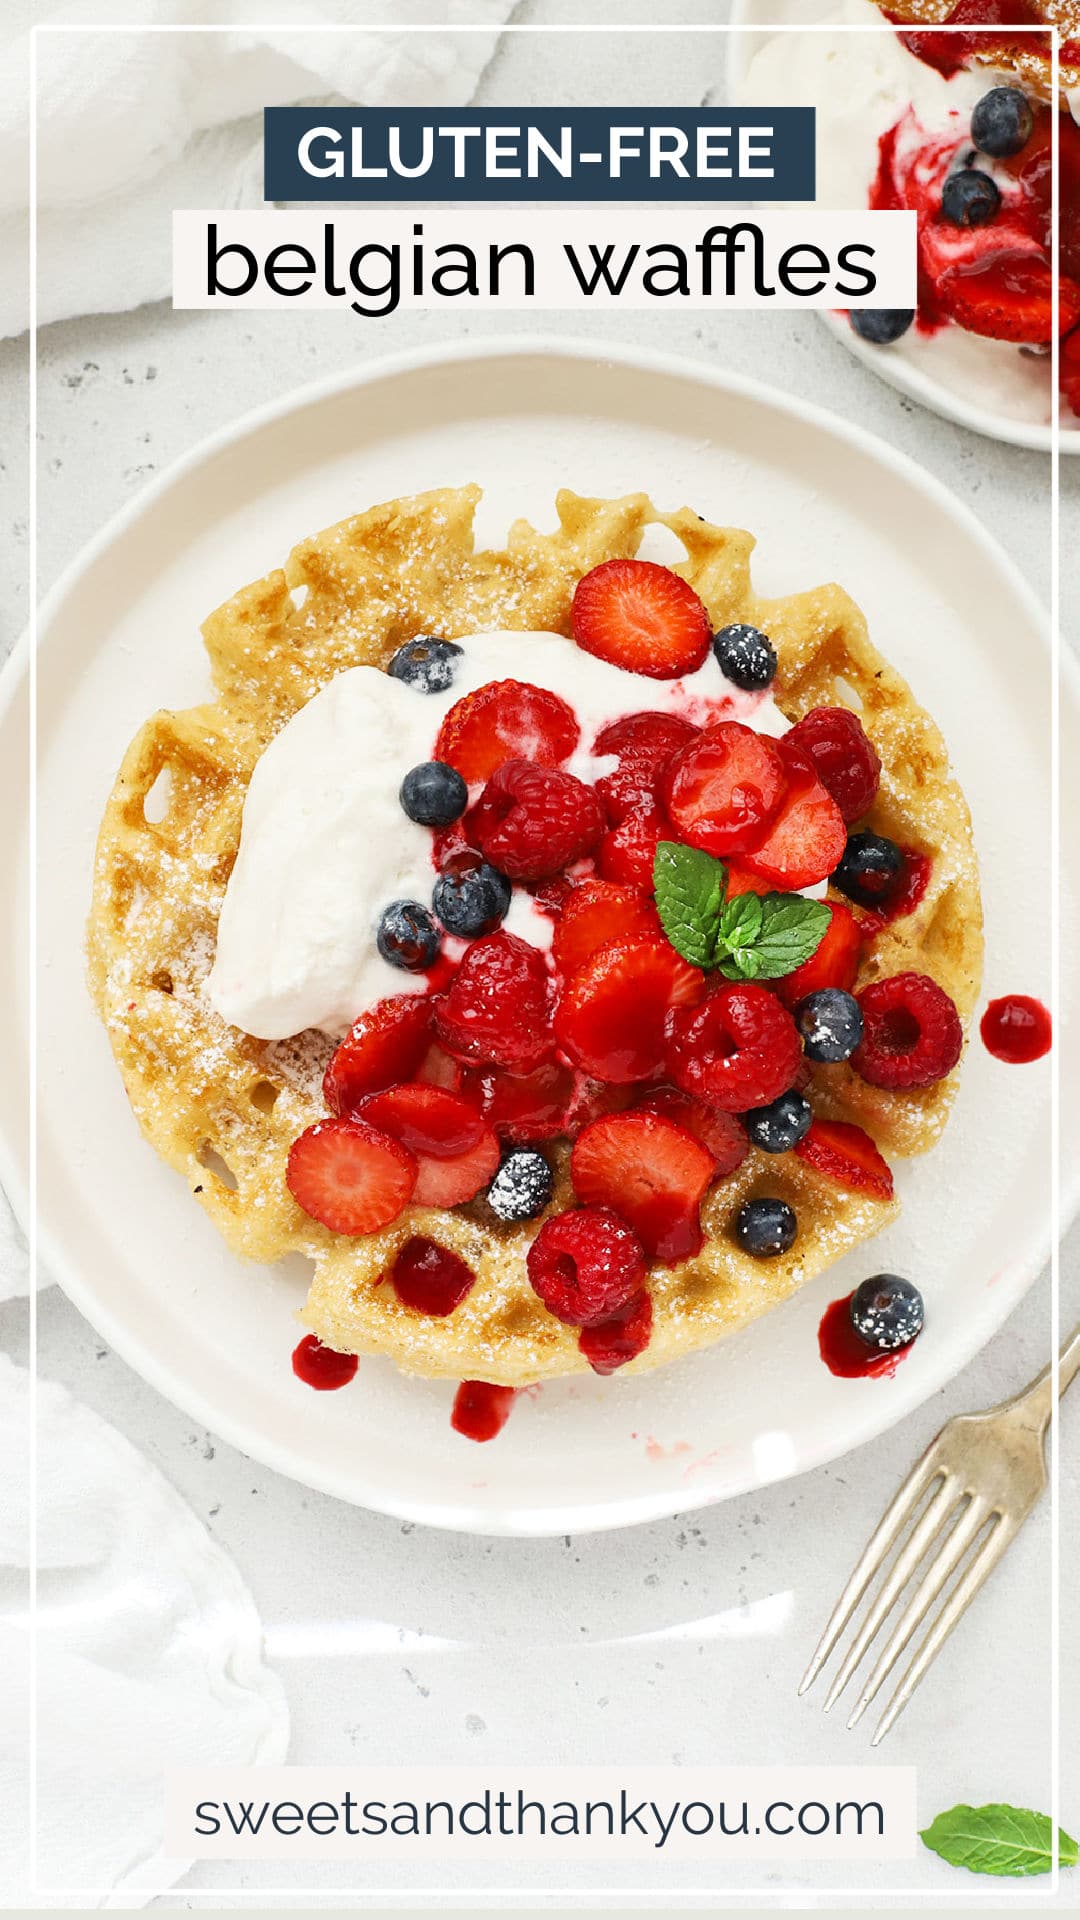 Gluten-Free Belgian Waffles - These fluffy gluten-free waffles are your new breakfast fave. Don't miss all our favorite toppings to try! // Gluten-free Belgian waffle recipe // thick gluten-free waffles // the best Gluten-free waffles // easy gluten-free waffles // how to make gluten-free Belgian waffles //